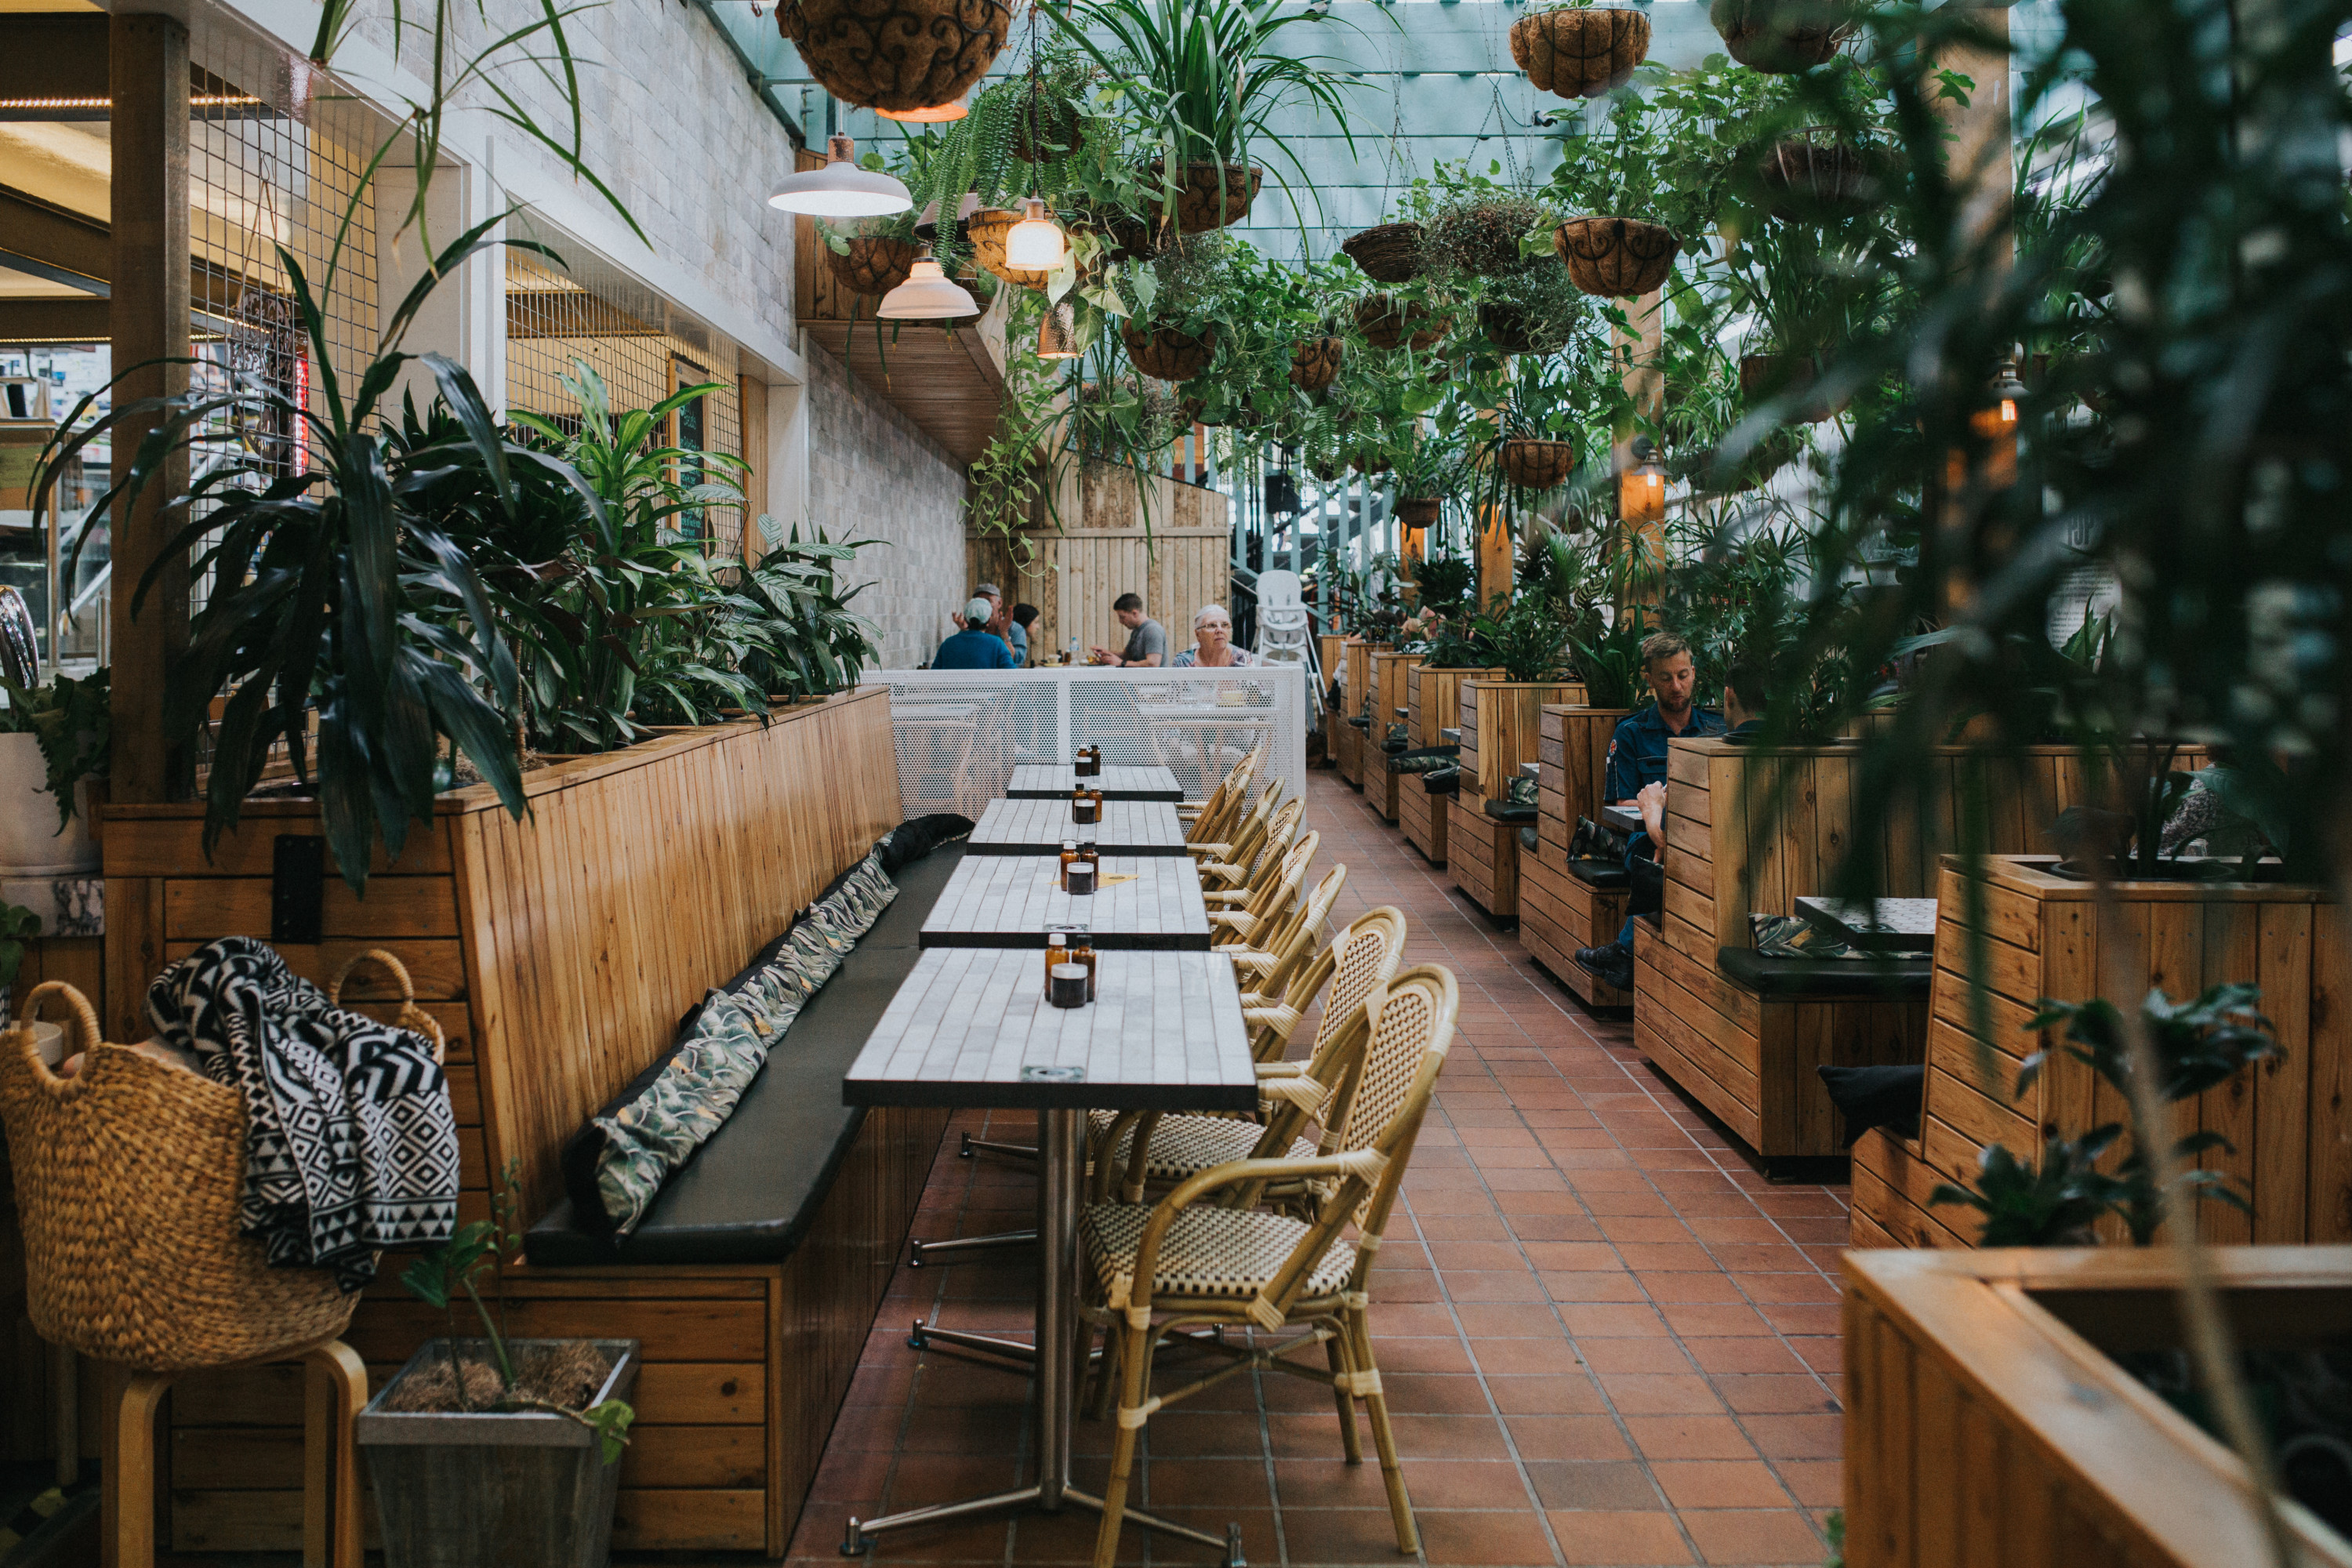 the lush interior of a cafe filled with greenery